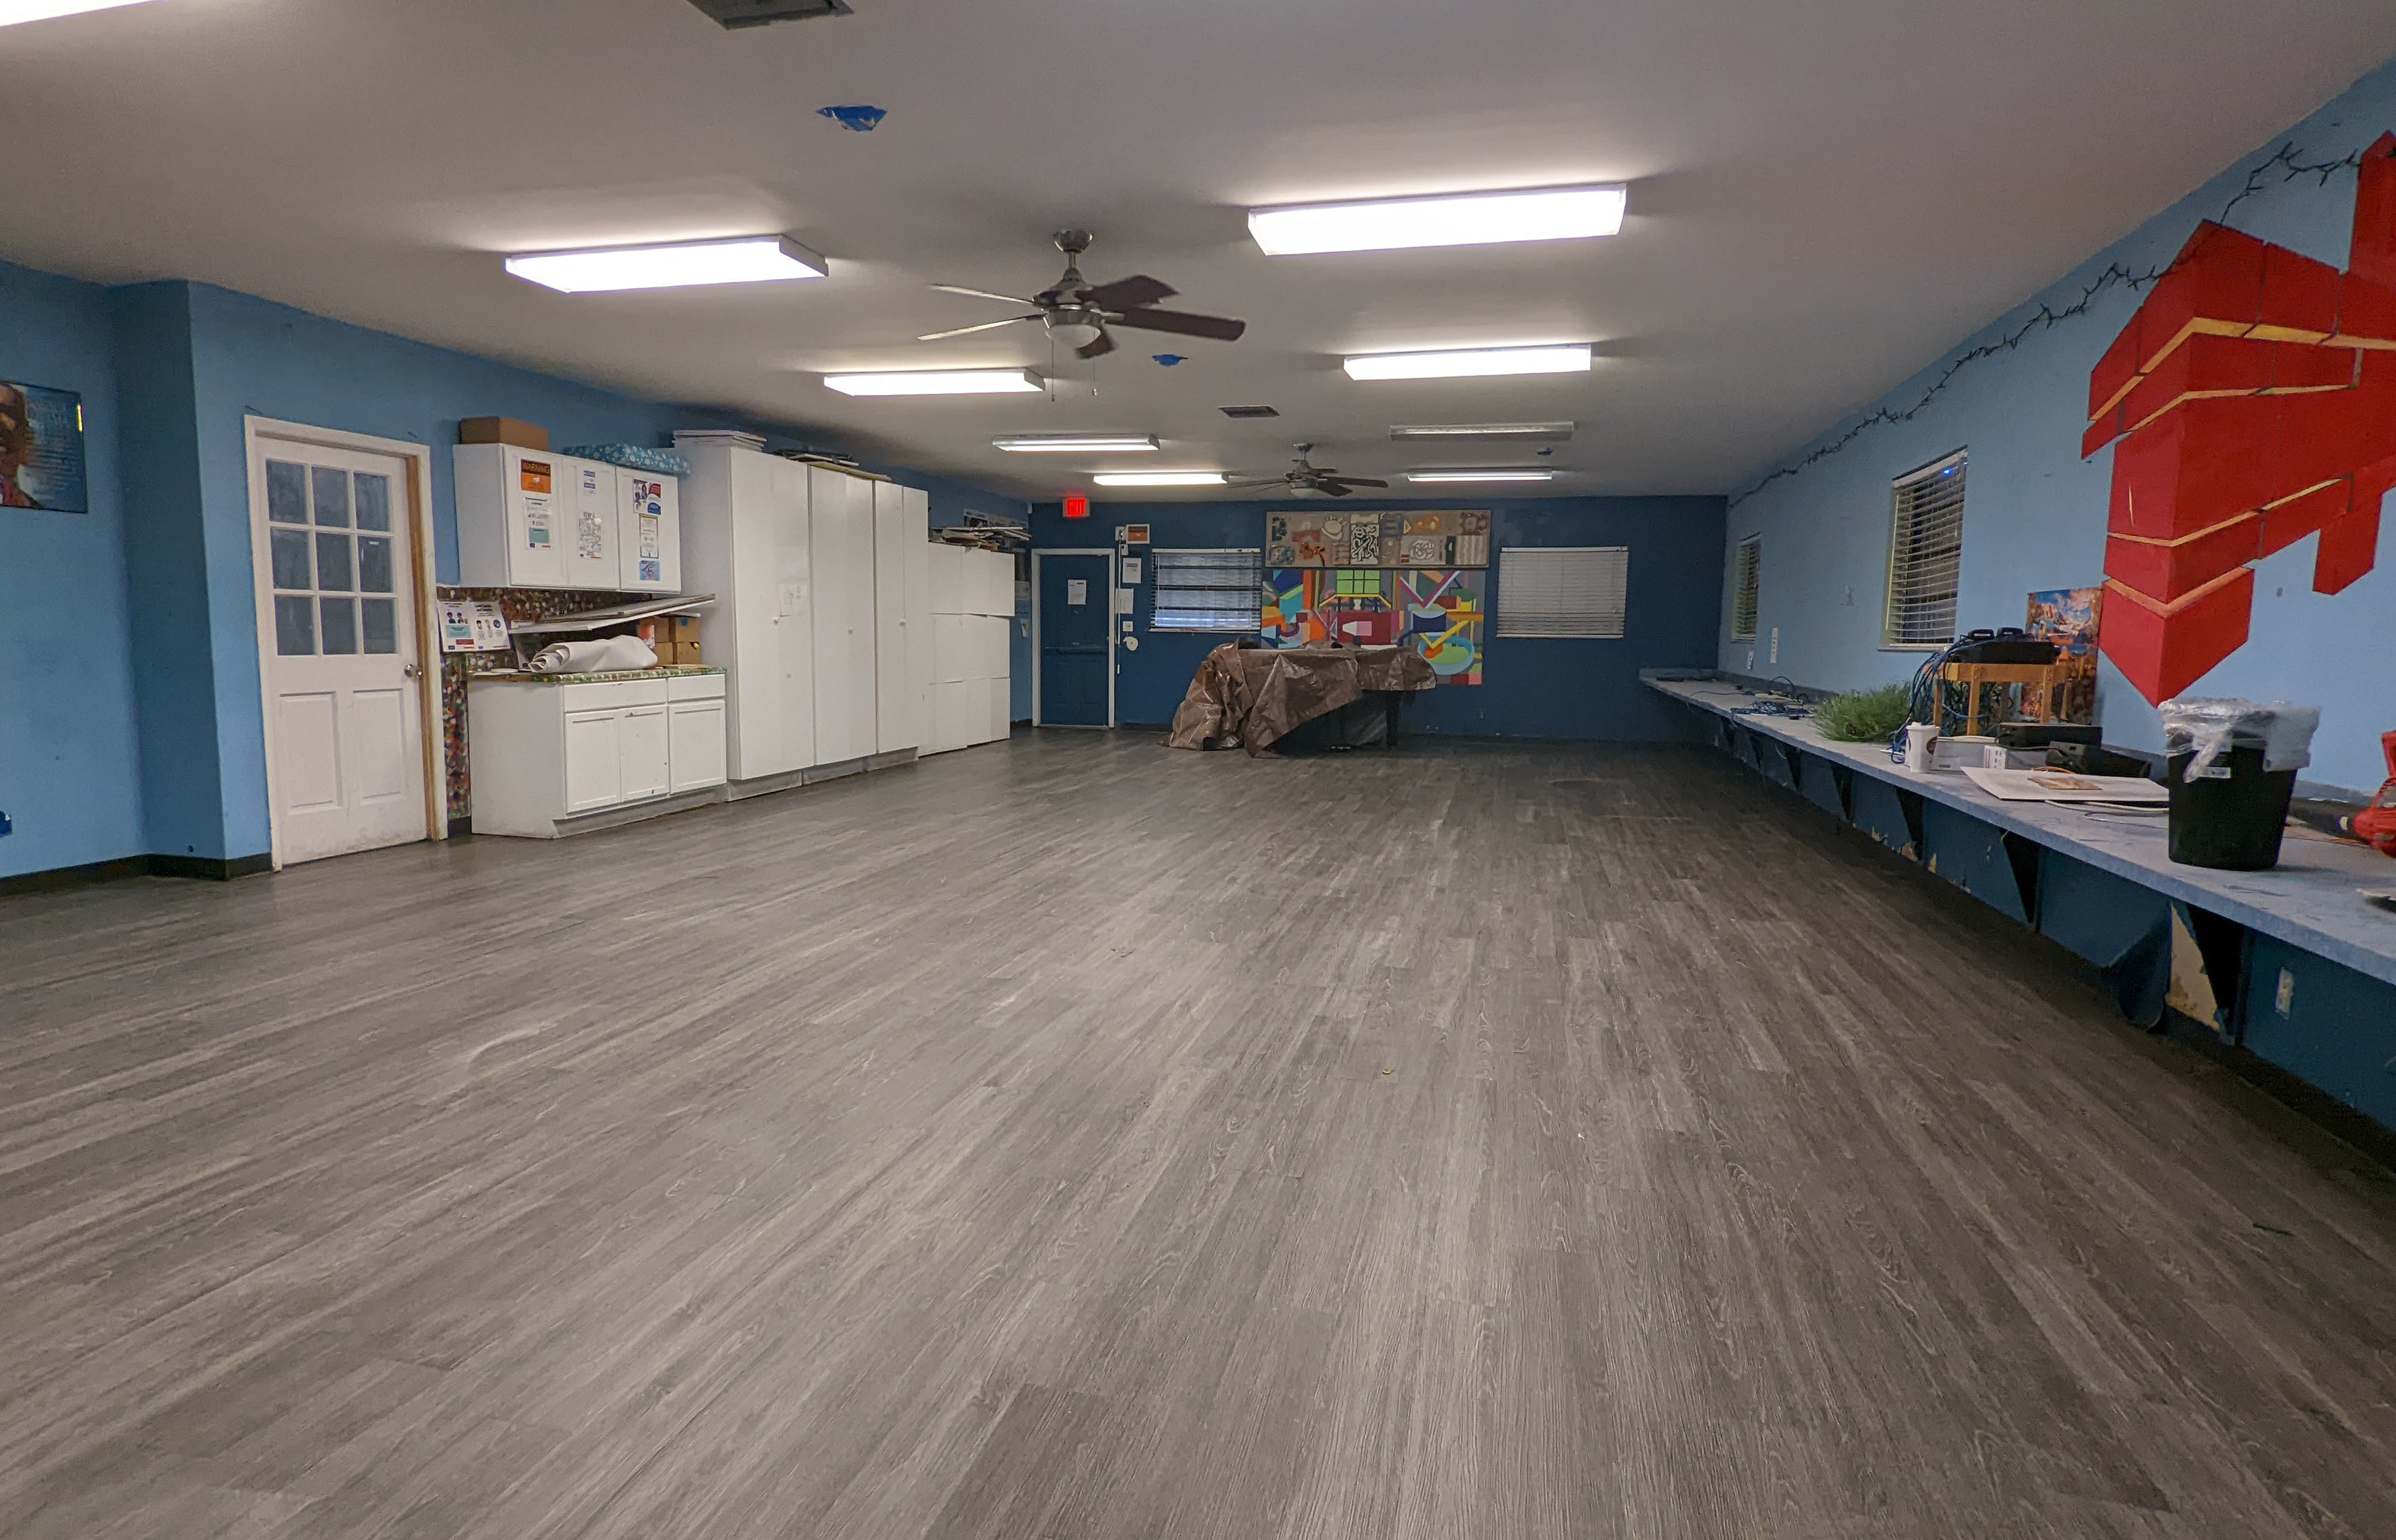 After photo of Milagro Center's updated Teen Center featuring new floors and ceilings.